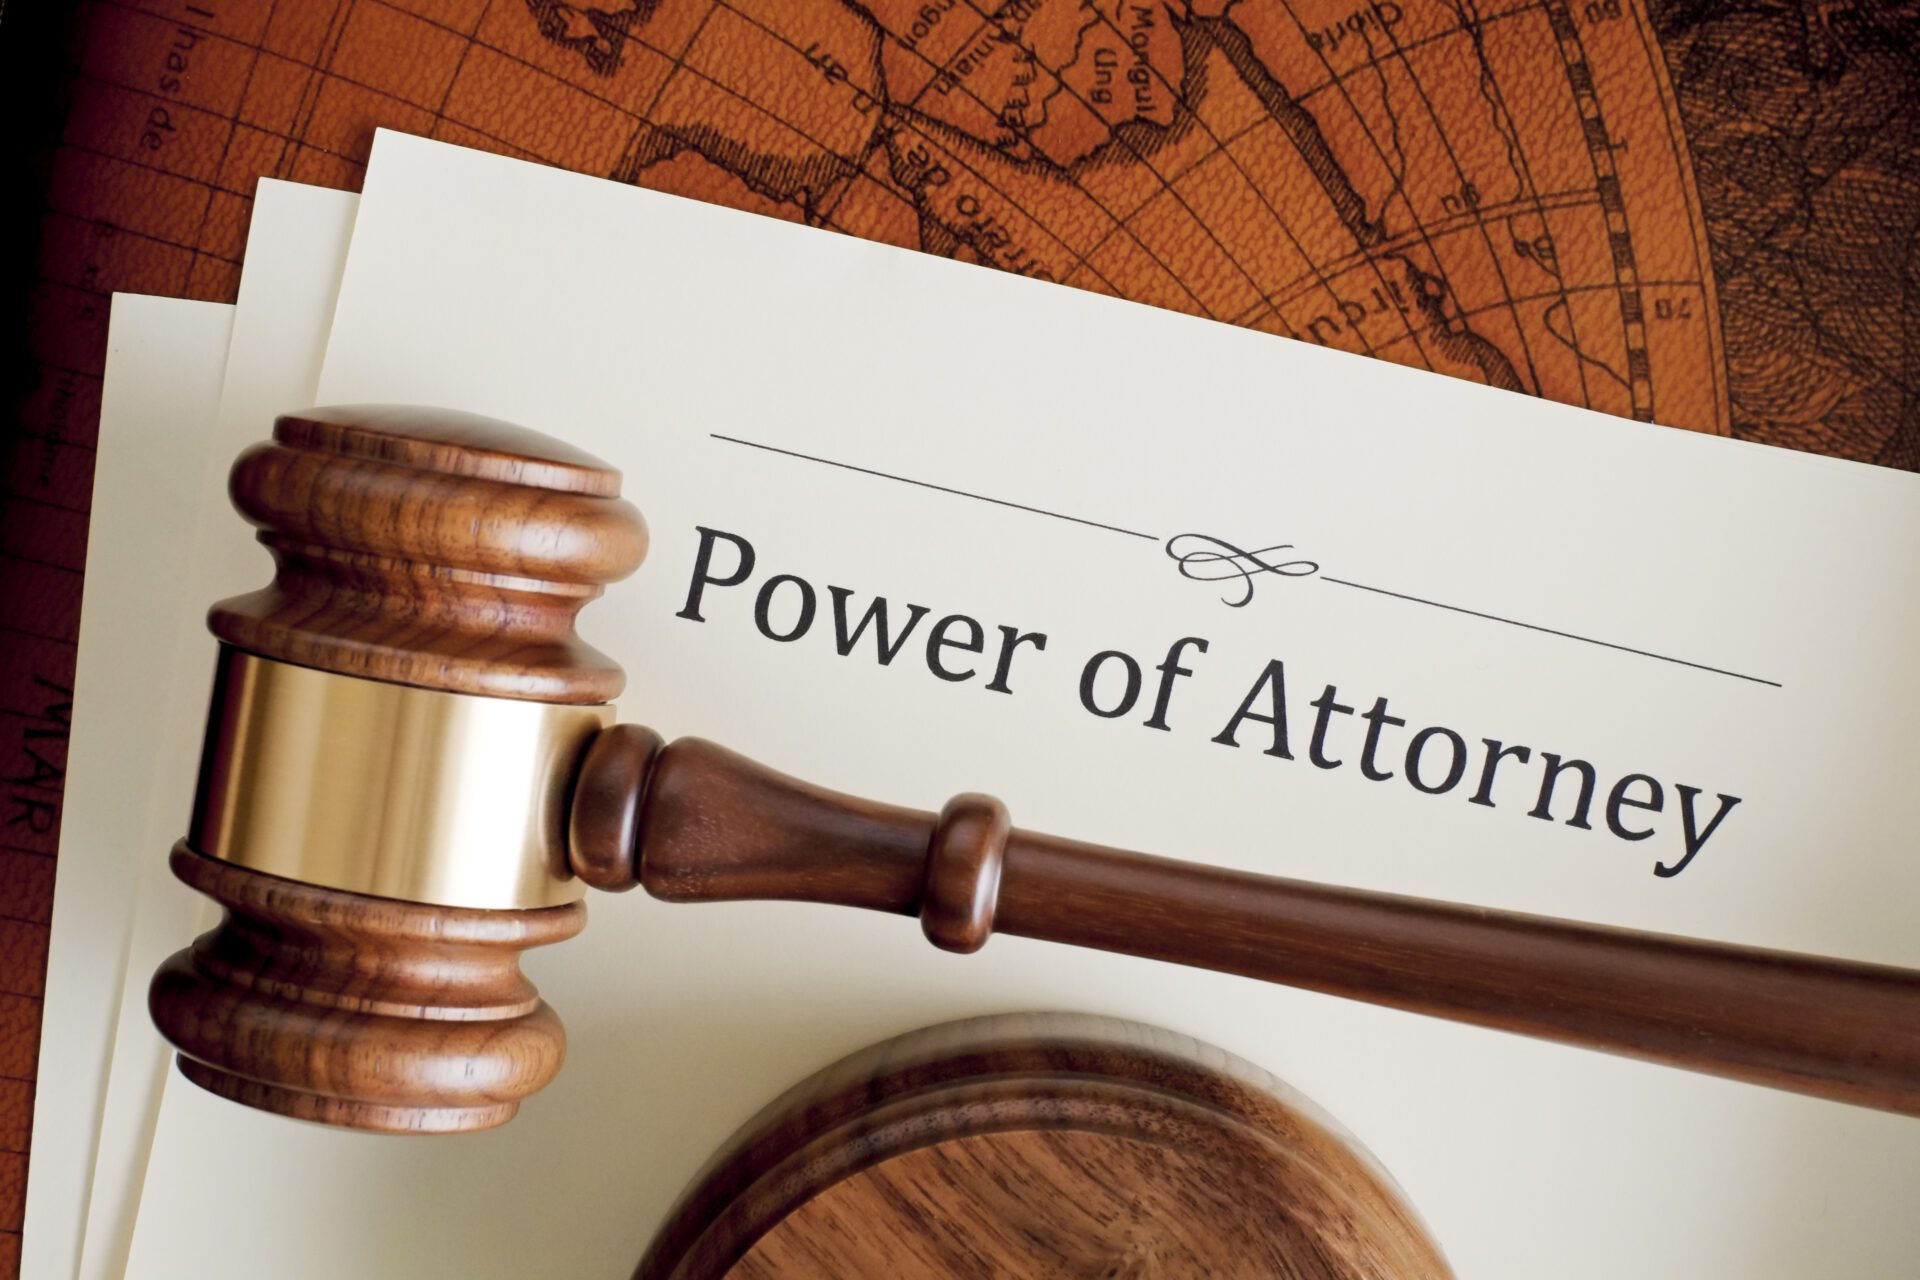 Image of Power of Attorney document and gavel